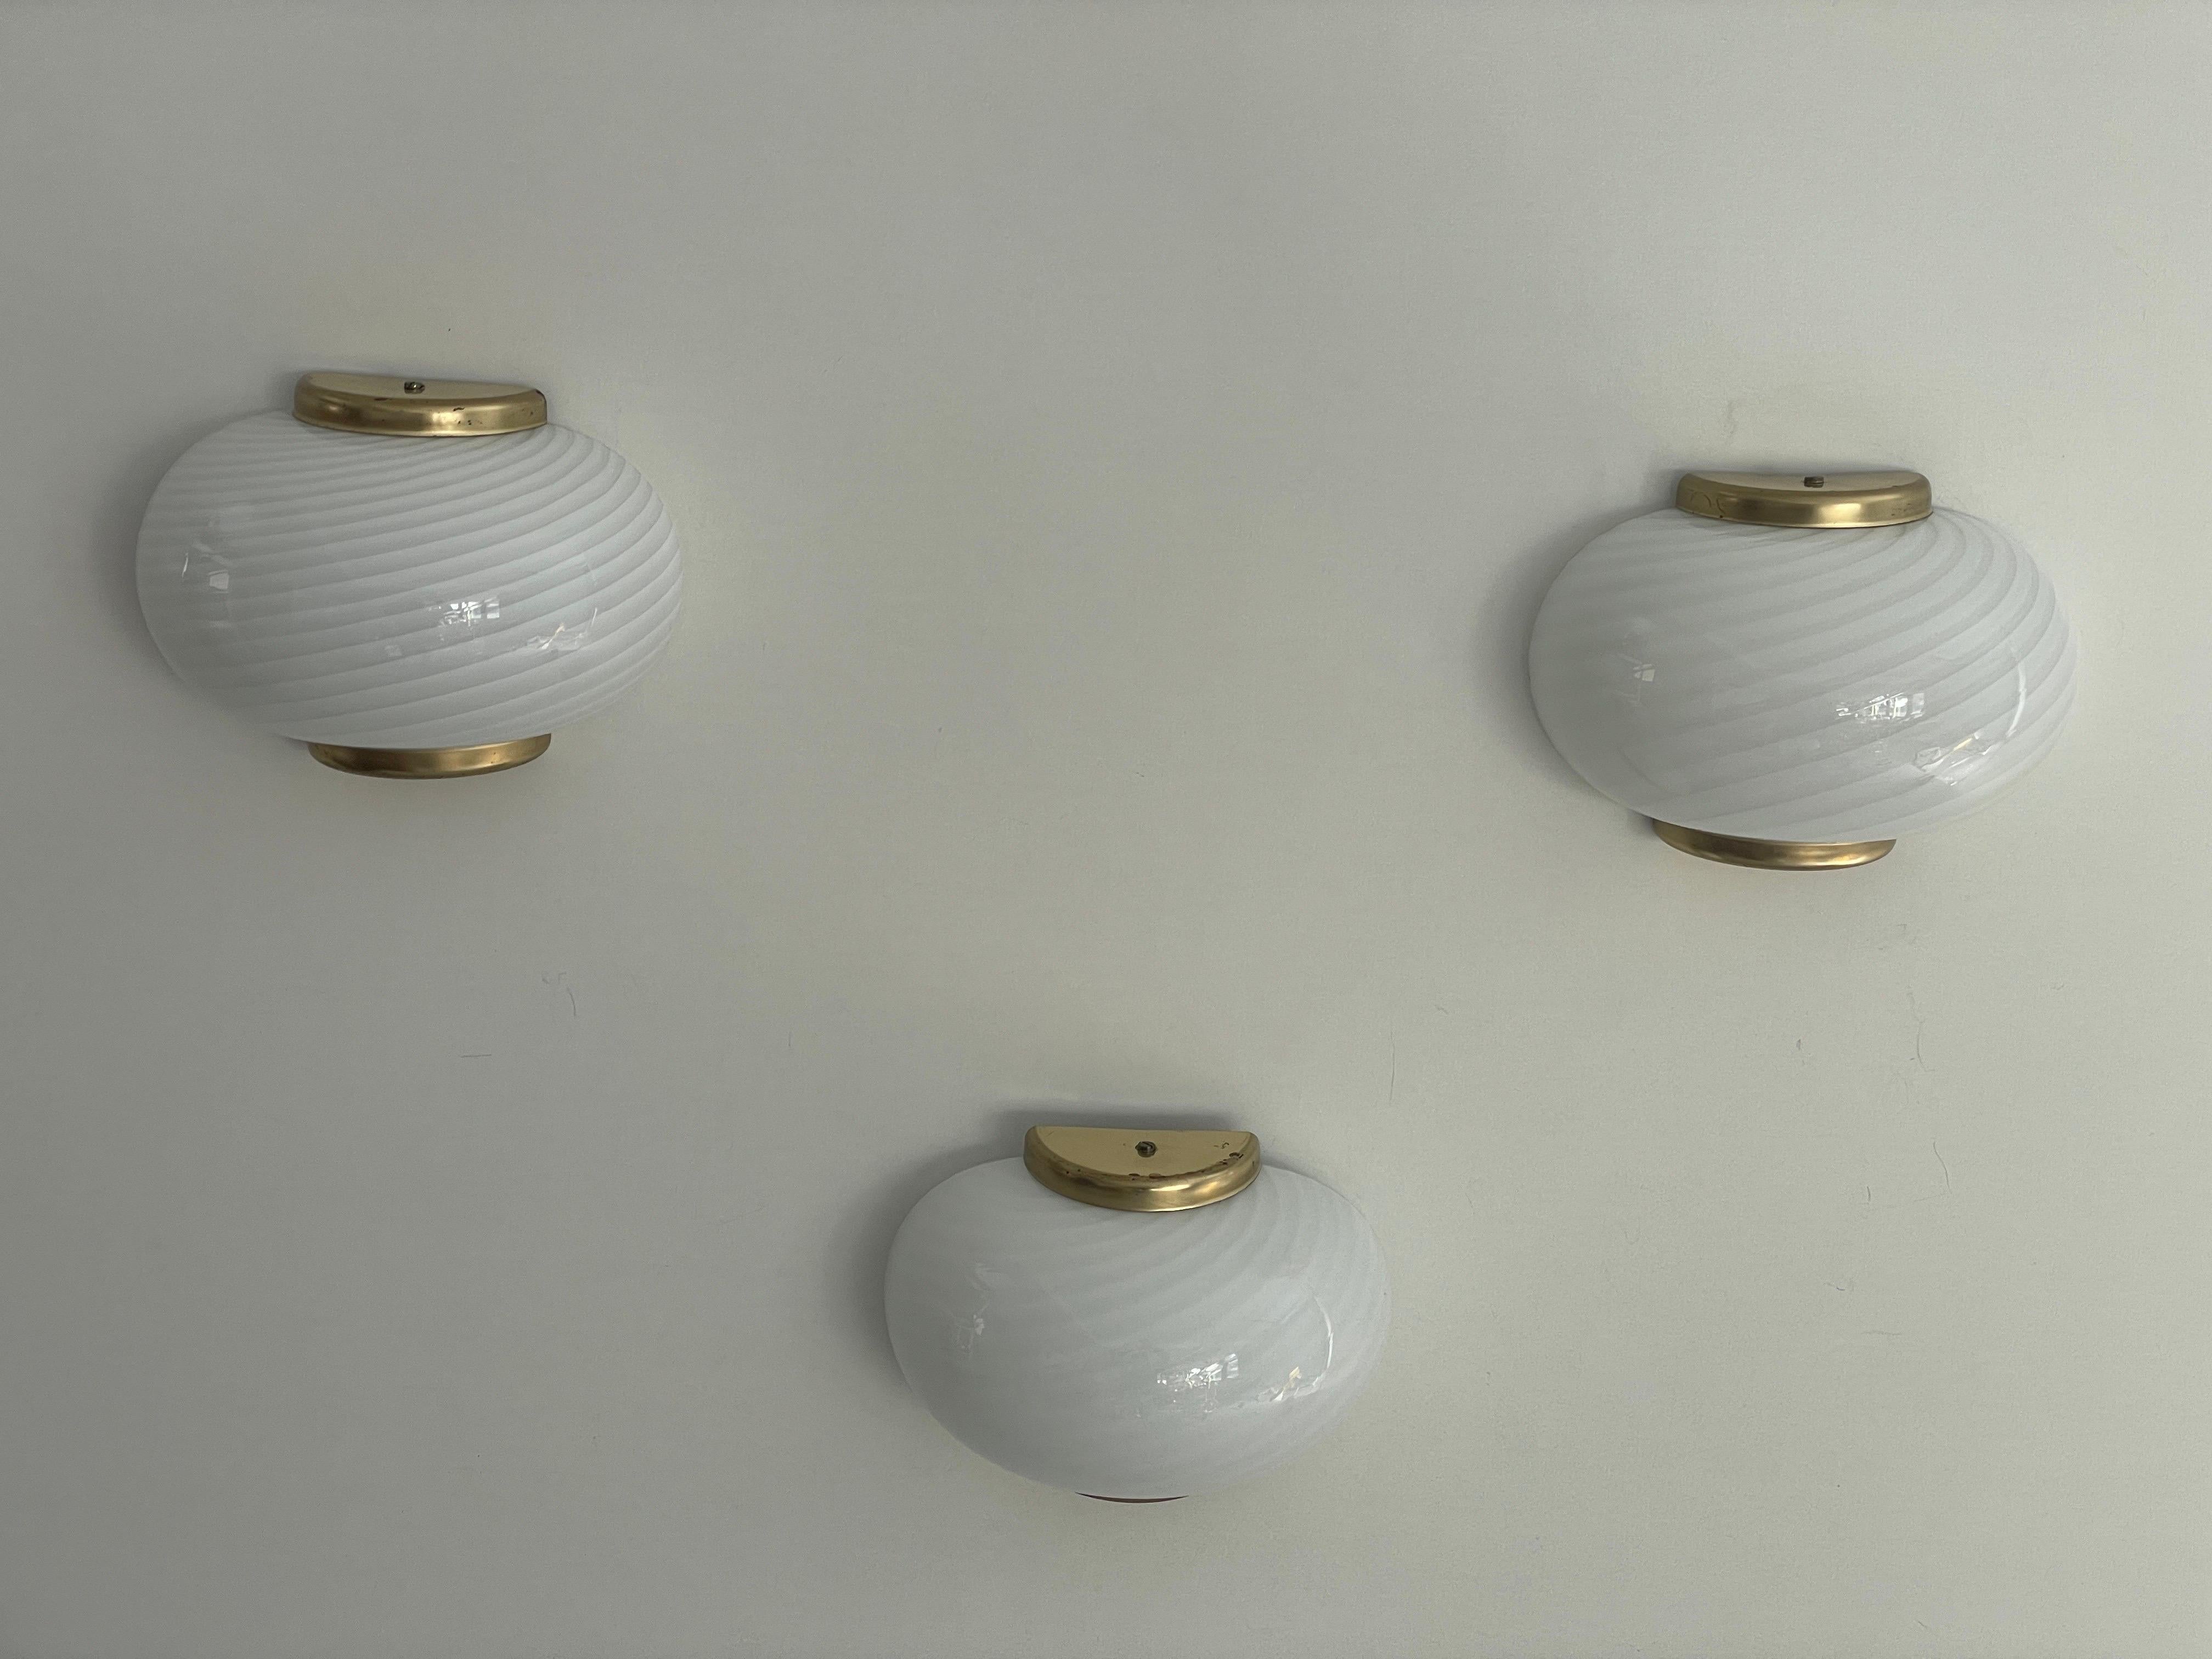 Swirl pattern Murano Glass and Brass Set of 3 Sconces by Beatrix, 1970s, Italy

Very elegant and minimalist wall lamps.
Lamp is in very good condition.

These lamps works with E14 standard light bulbs. 
Wired and suitable to use in all countries.